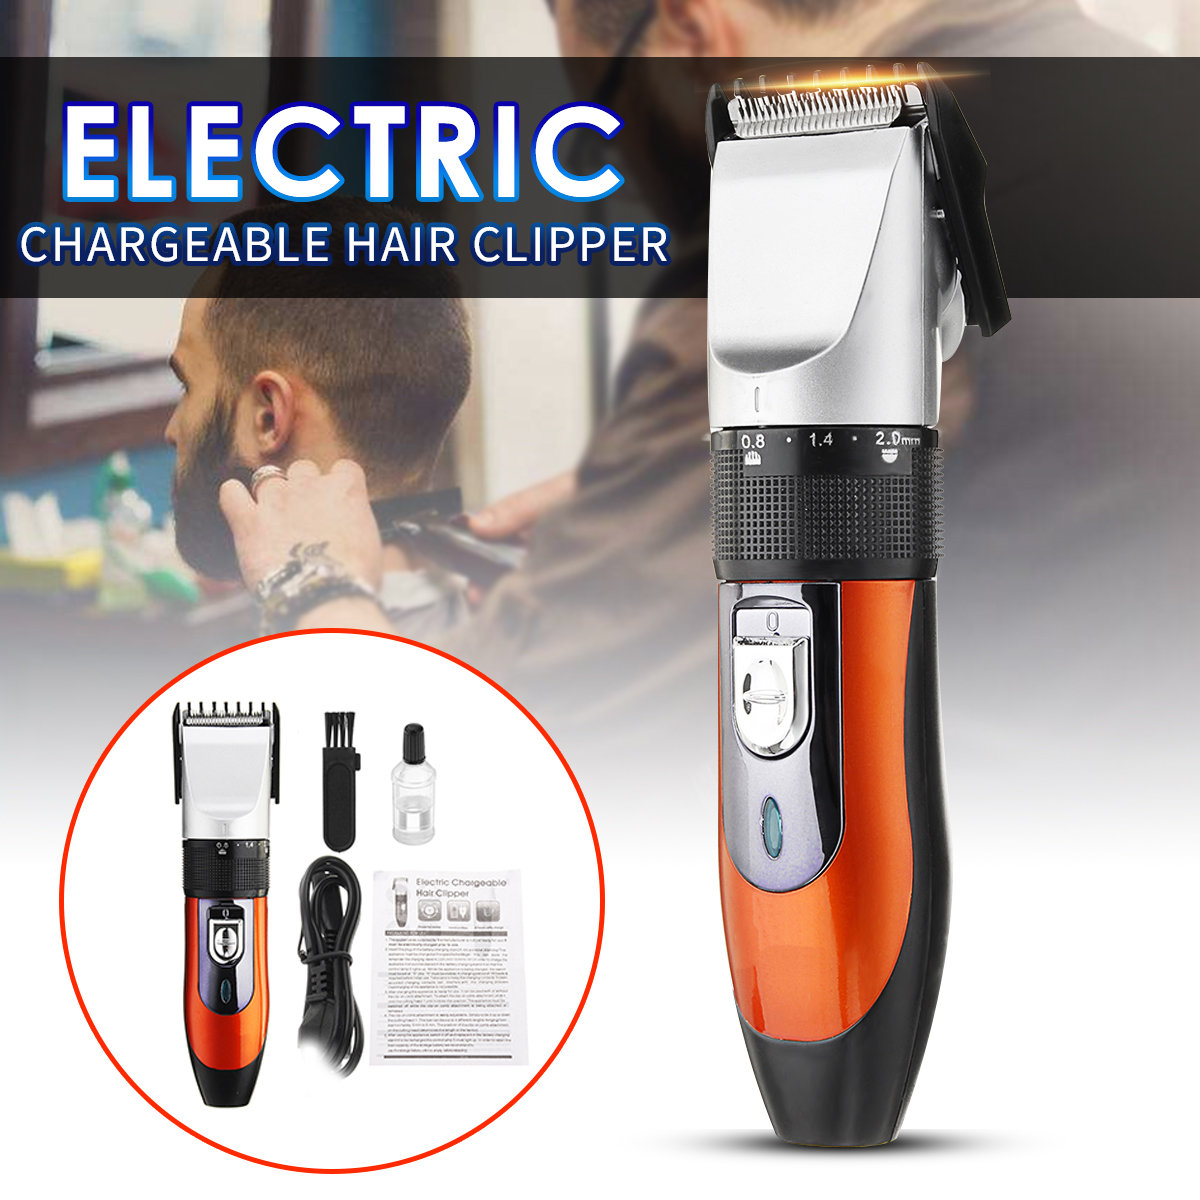 

KM-730 Electric Hair Trimmer